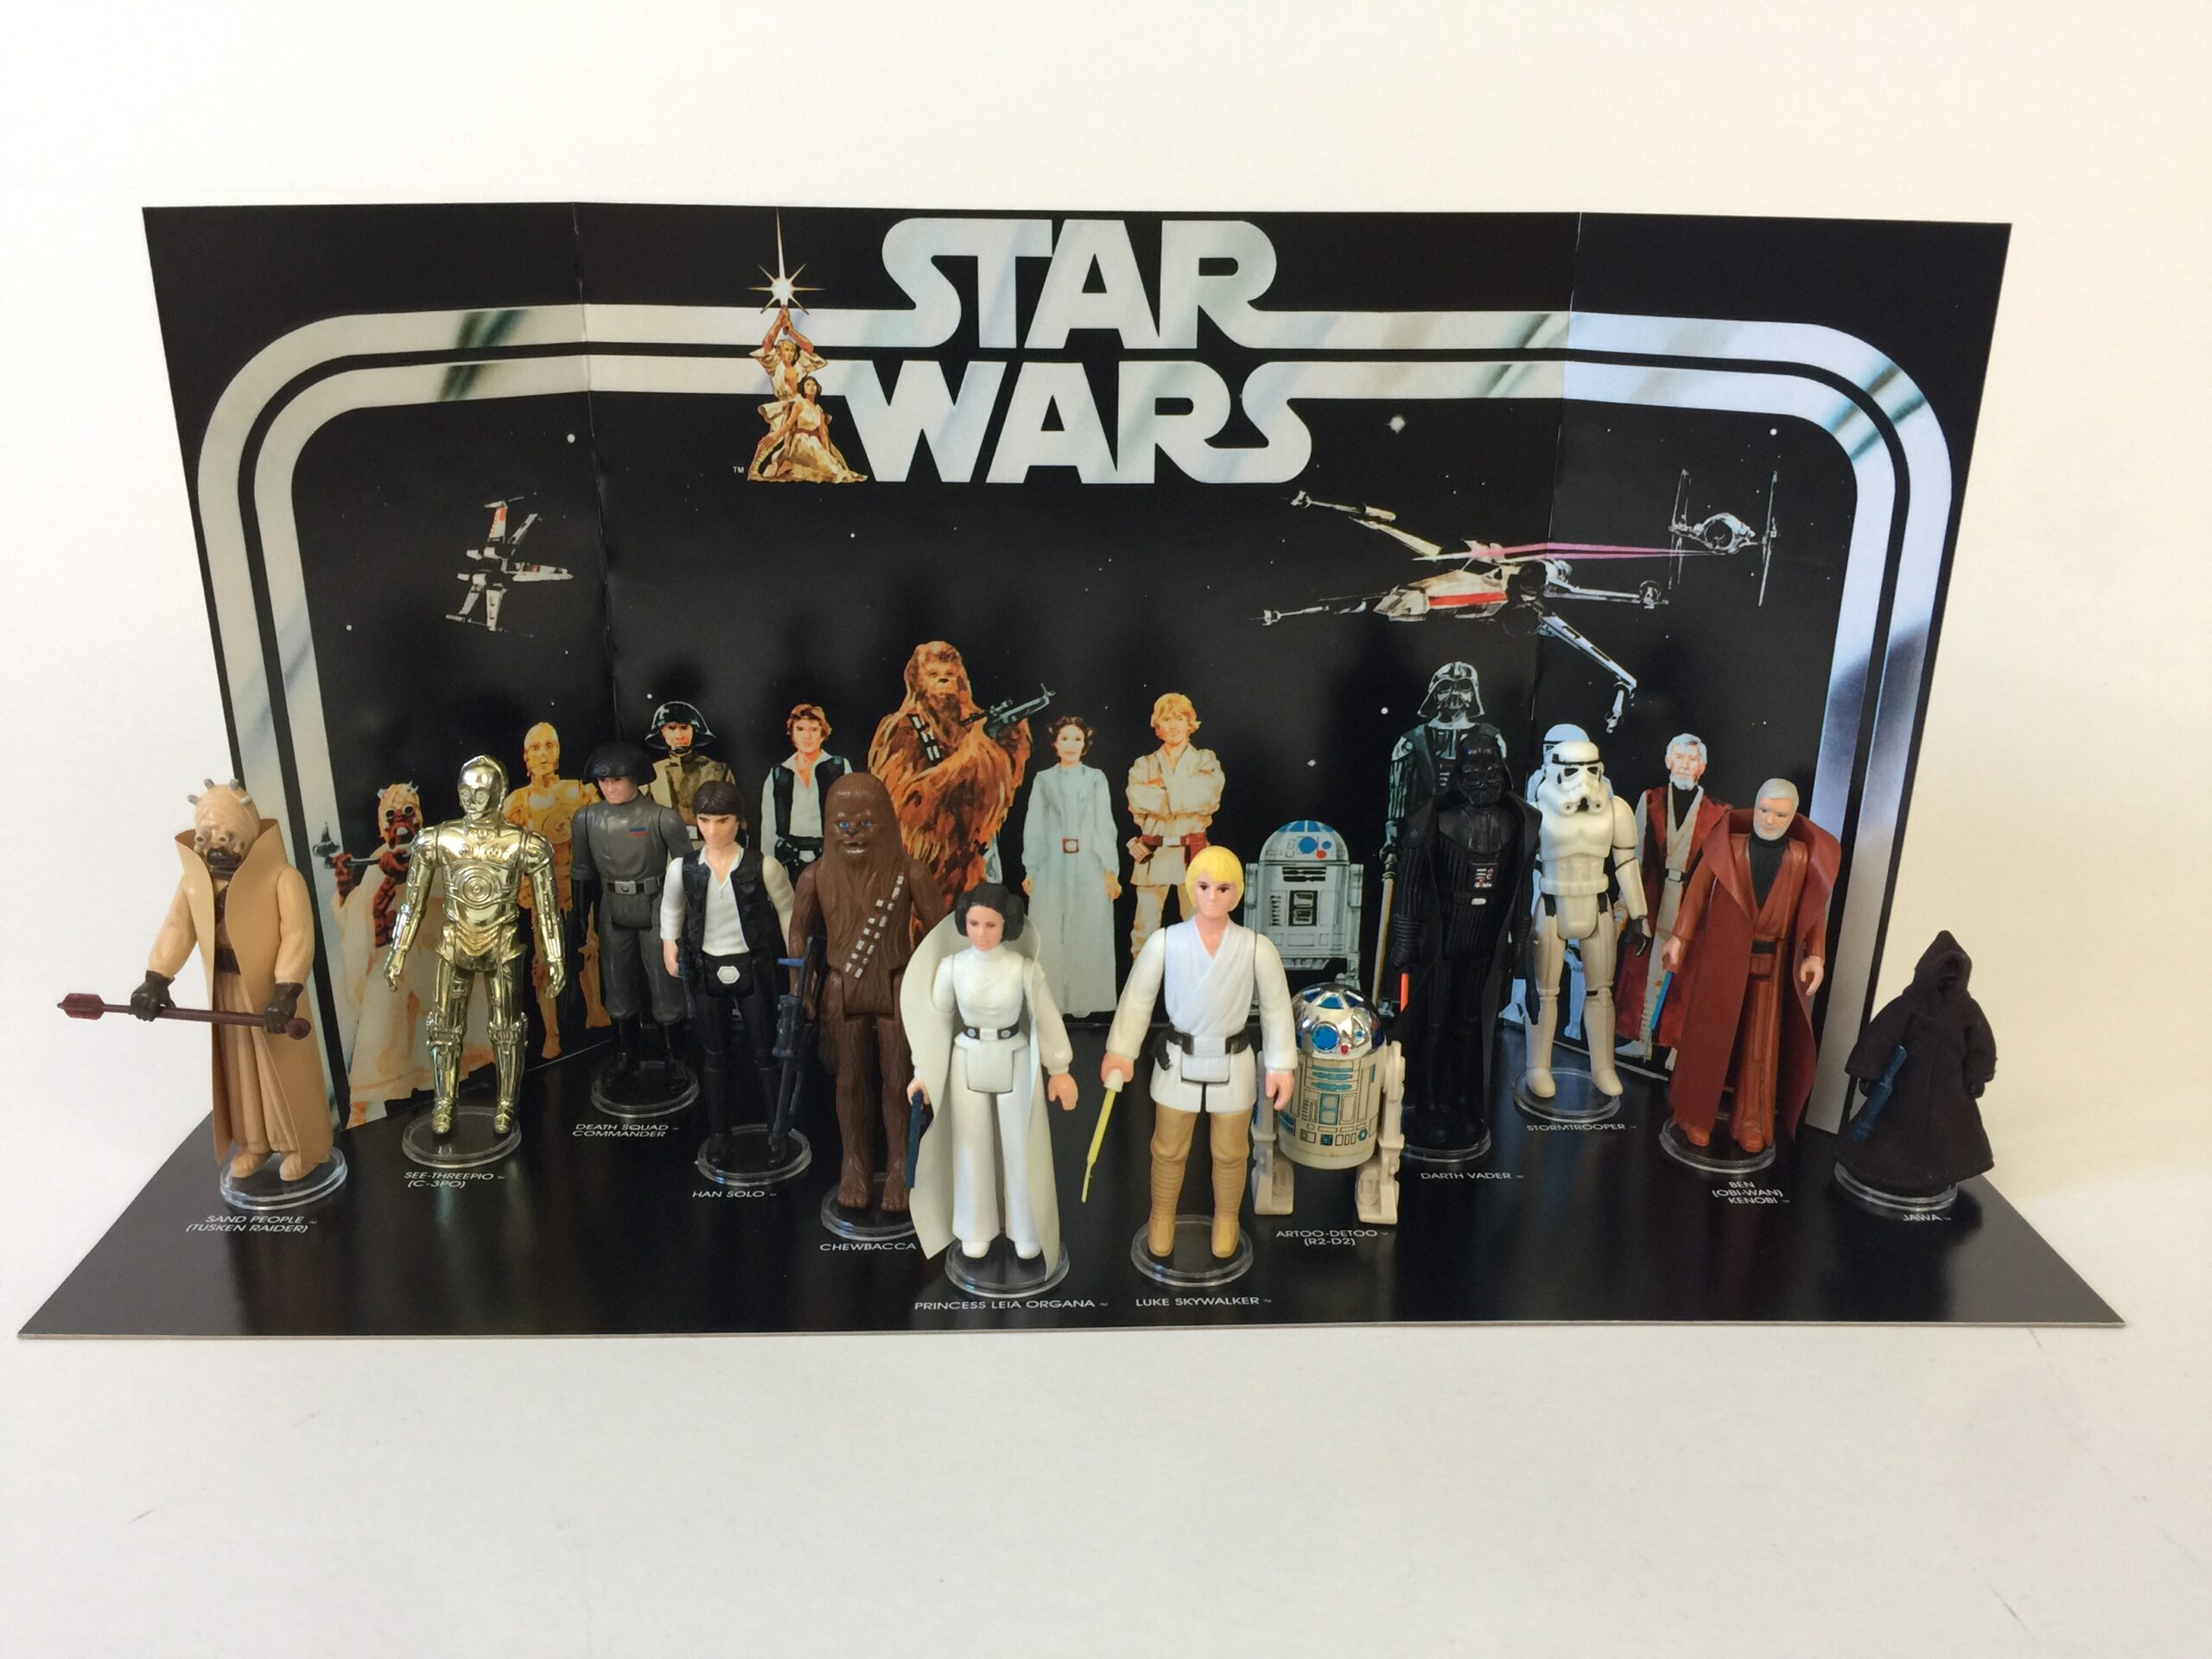 Star Wars' Early Bird Kit Nostalgia – IT CAME FROM…